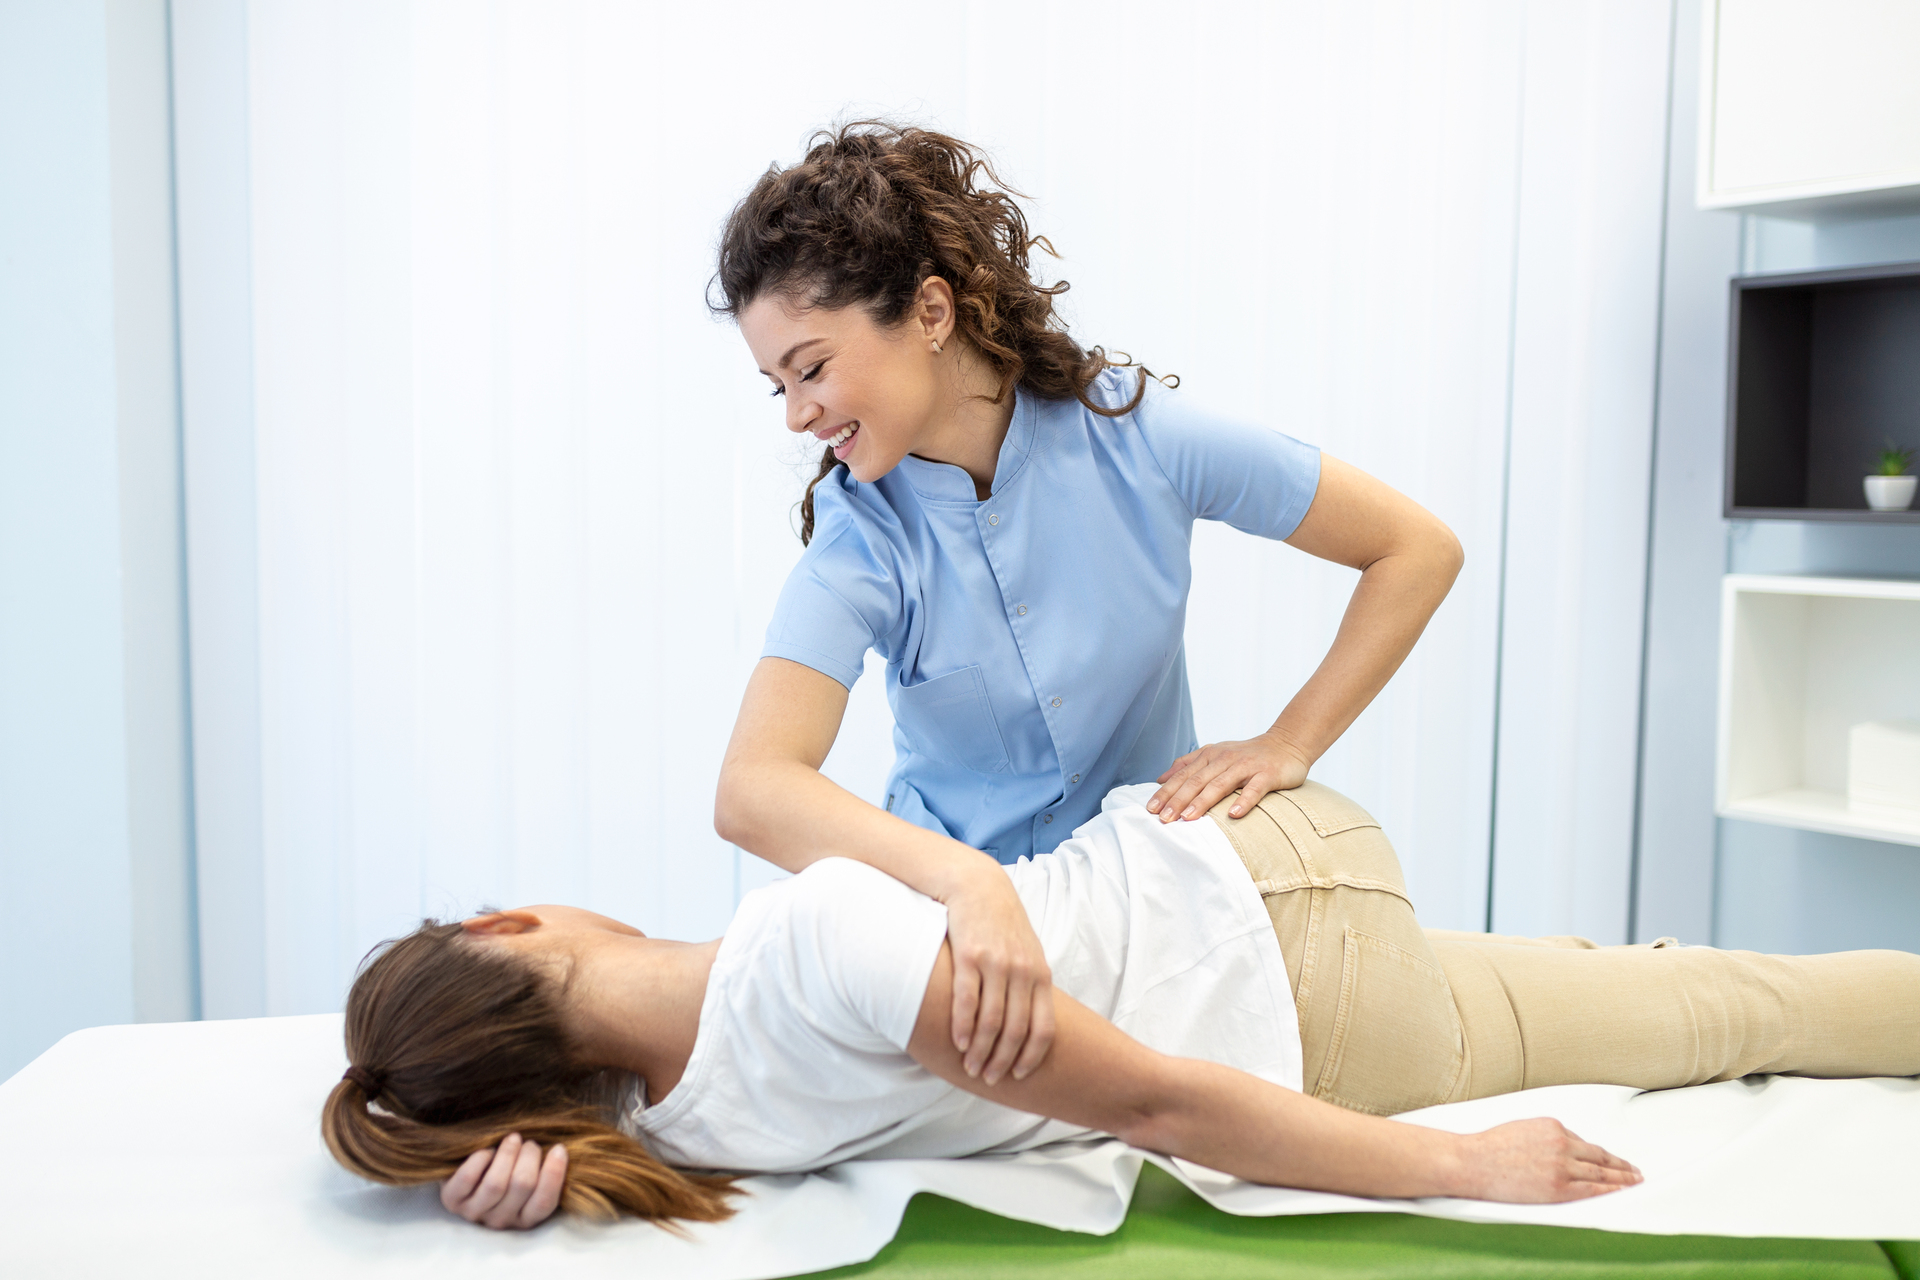 chiropractor giving an adjustment before recording visit in EHR software